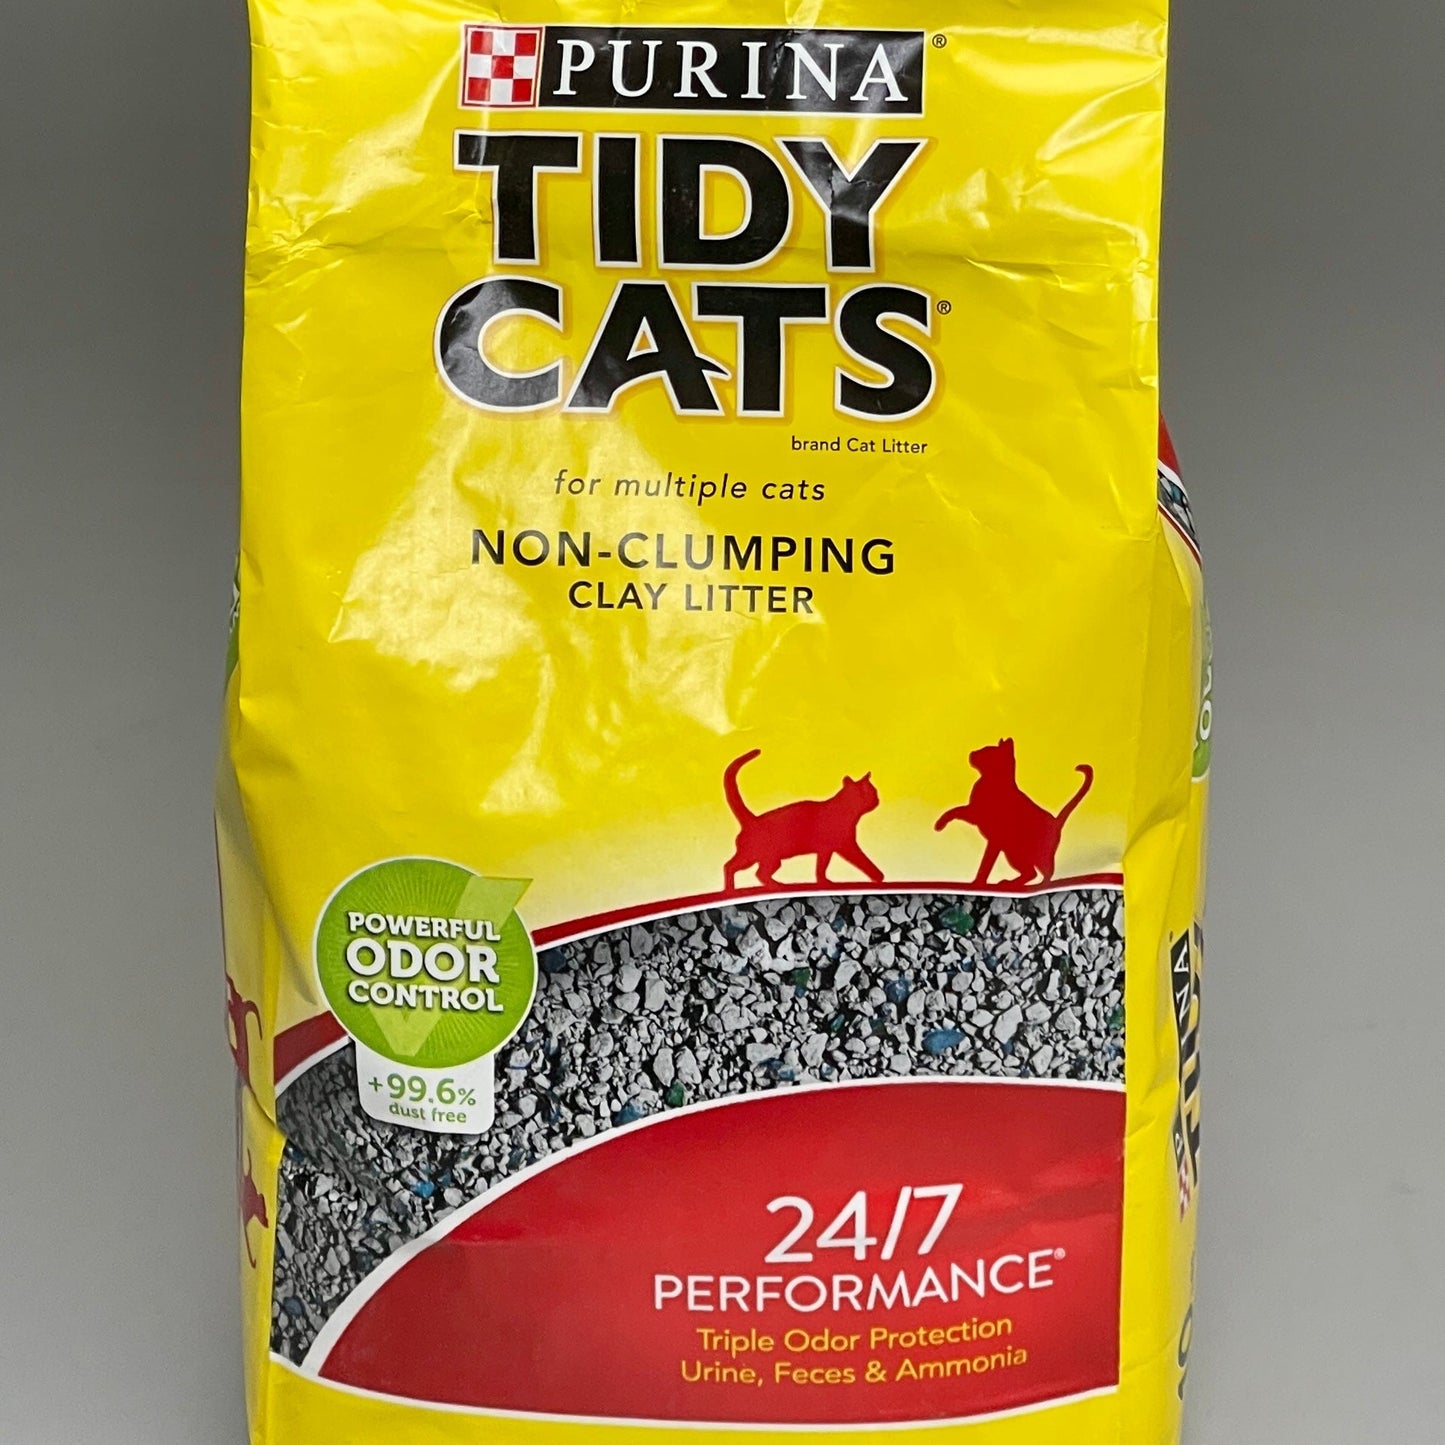 ZA@ PURINA Tidy Cats Non Clumping Clay Cat Litter 4 Bags of 10 lb. (AS-IS) B